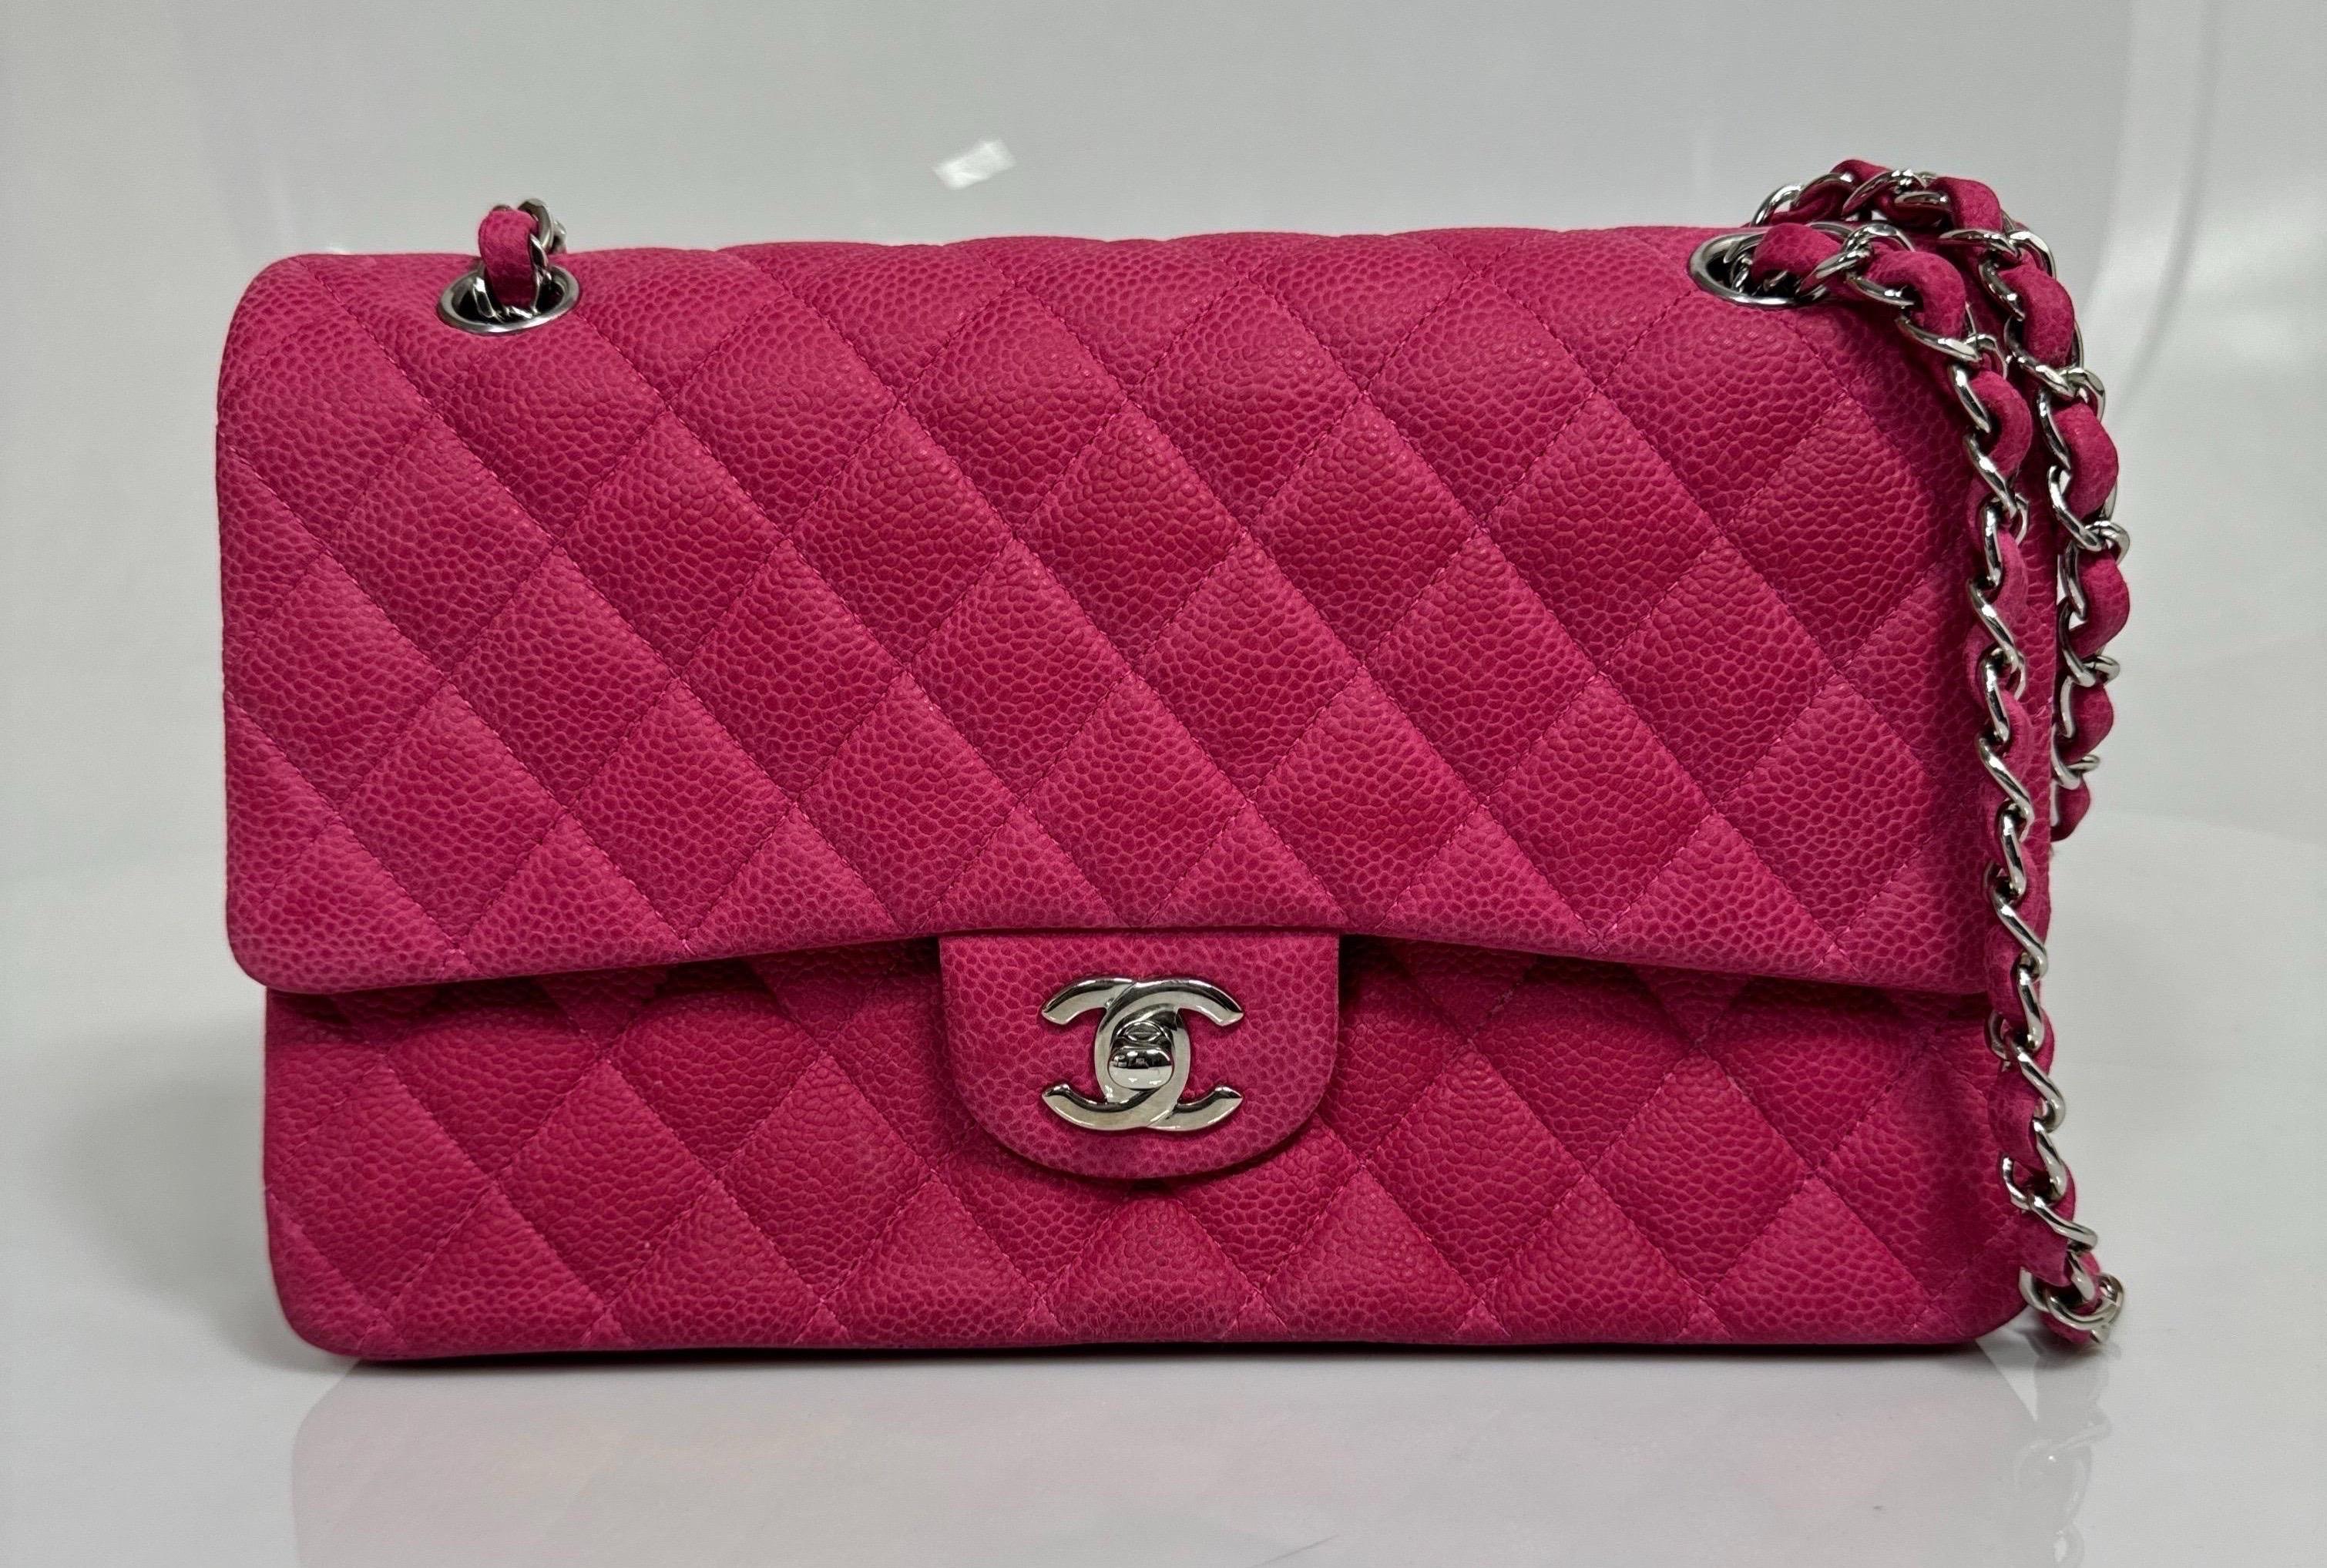 Chanel Resort 2013 Fuchsia Pink Matte Caviar Medium Double Flap Classic -SHW This Chanel Medium timeless classic double flap from the Resort/Cruise 2013 Collection is in fuchsia pink matte quilted grained caviar leather, and polished silver